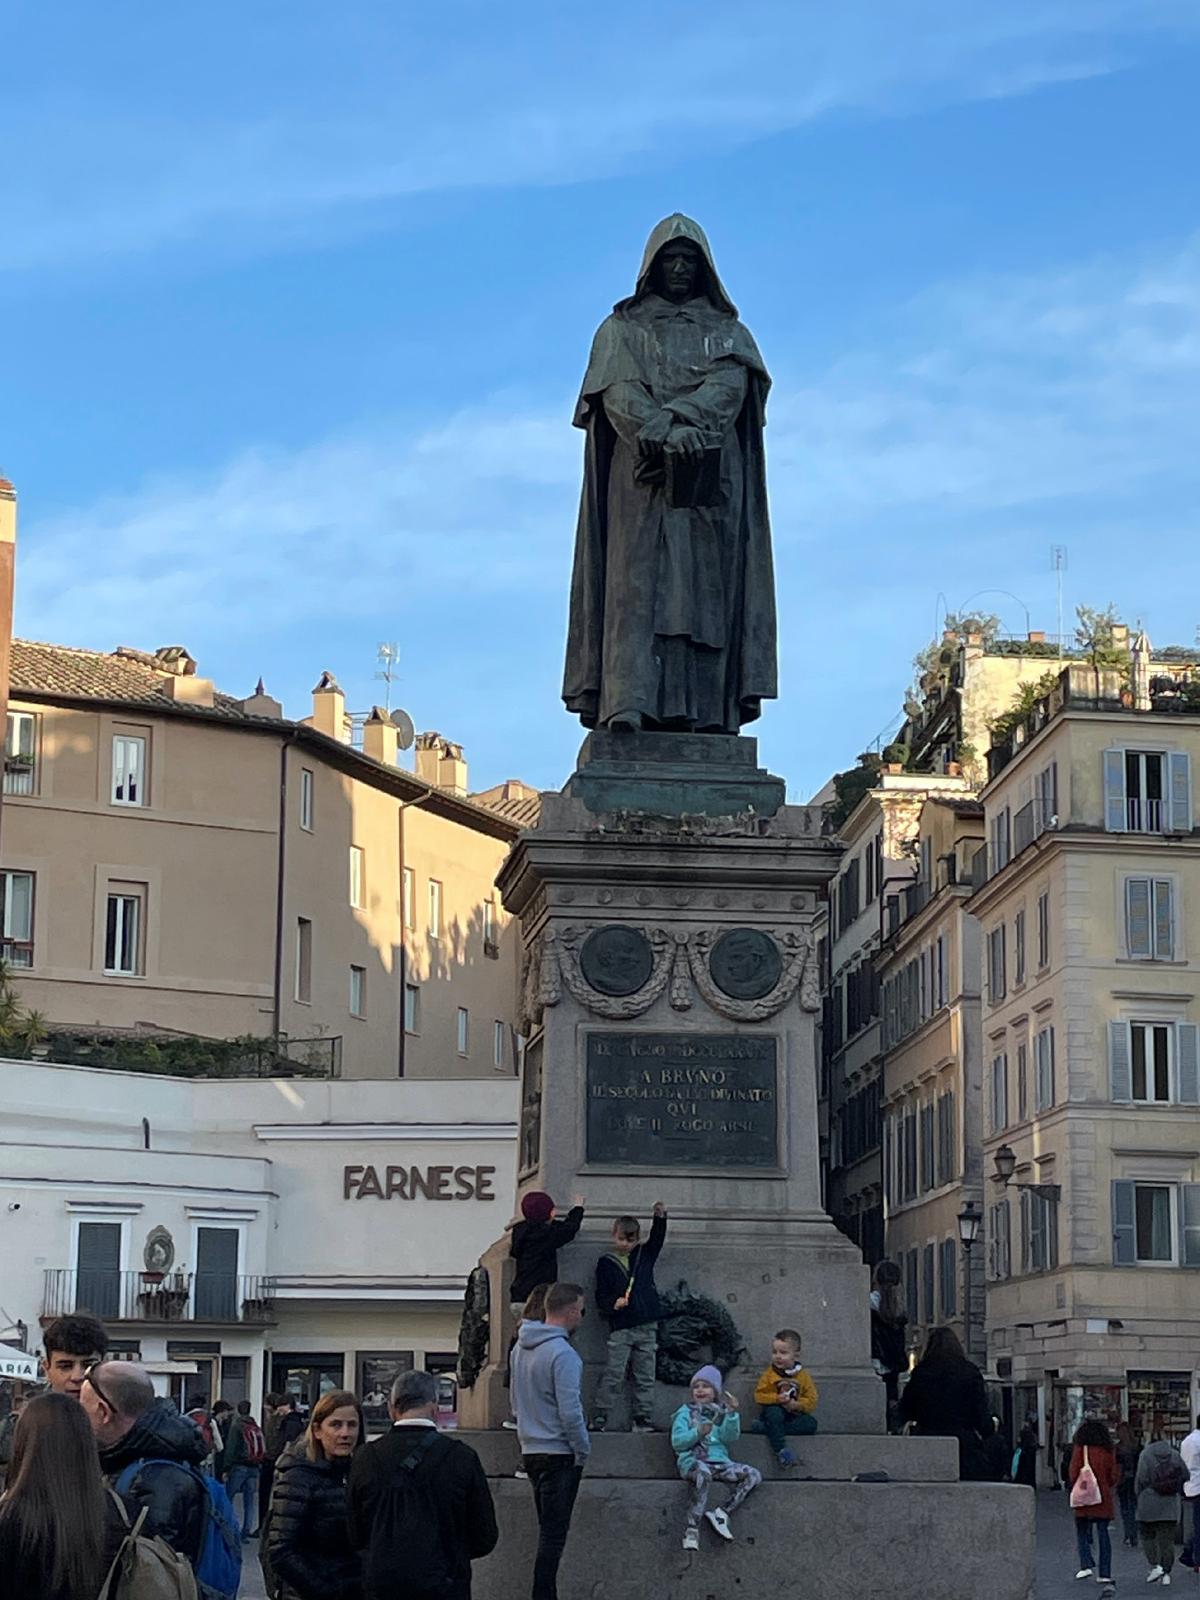 A statue of Giordano Bruno silently watches over bustling crowds in Rome's Campo de'Fiori. (Photo courtesy of Lesley Frederikson.)